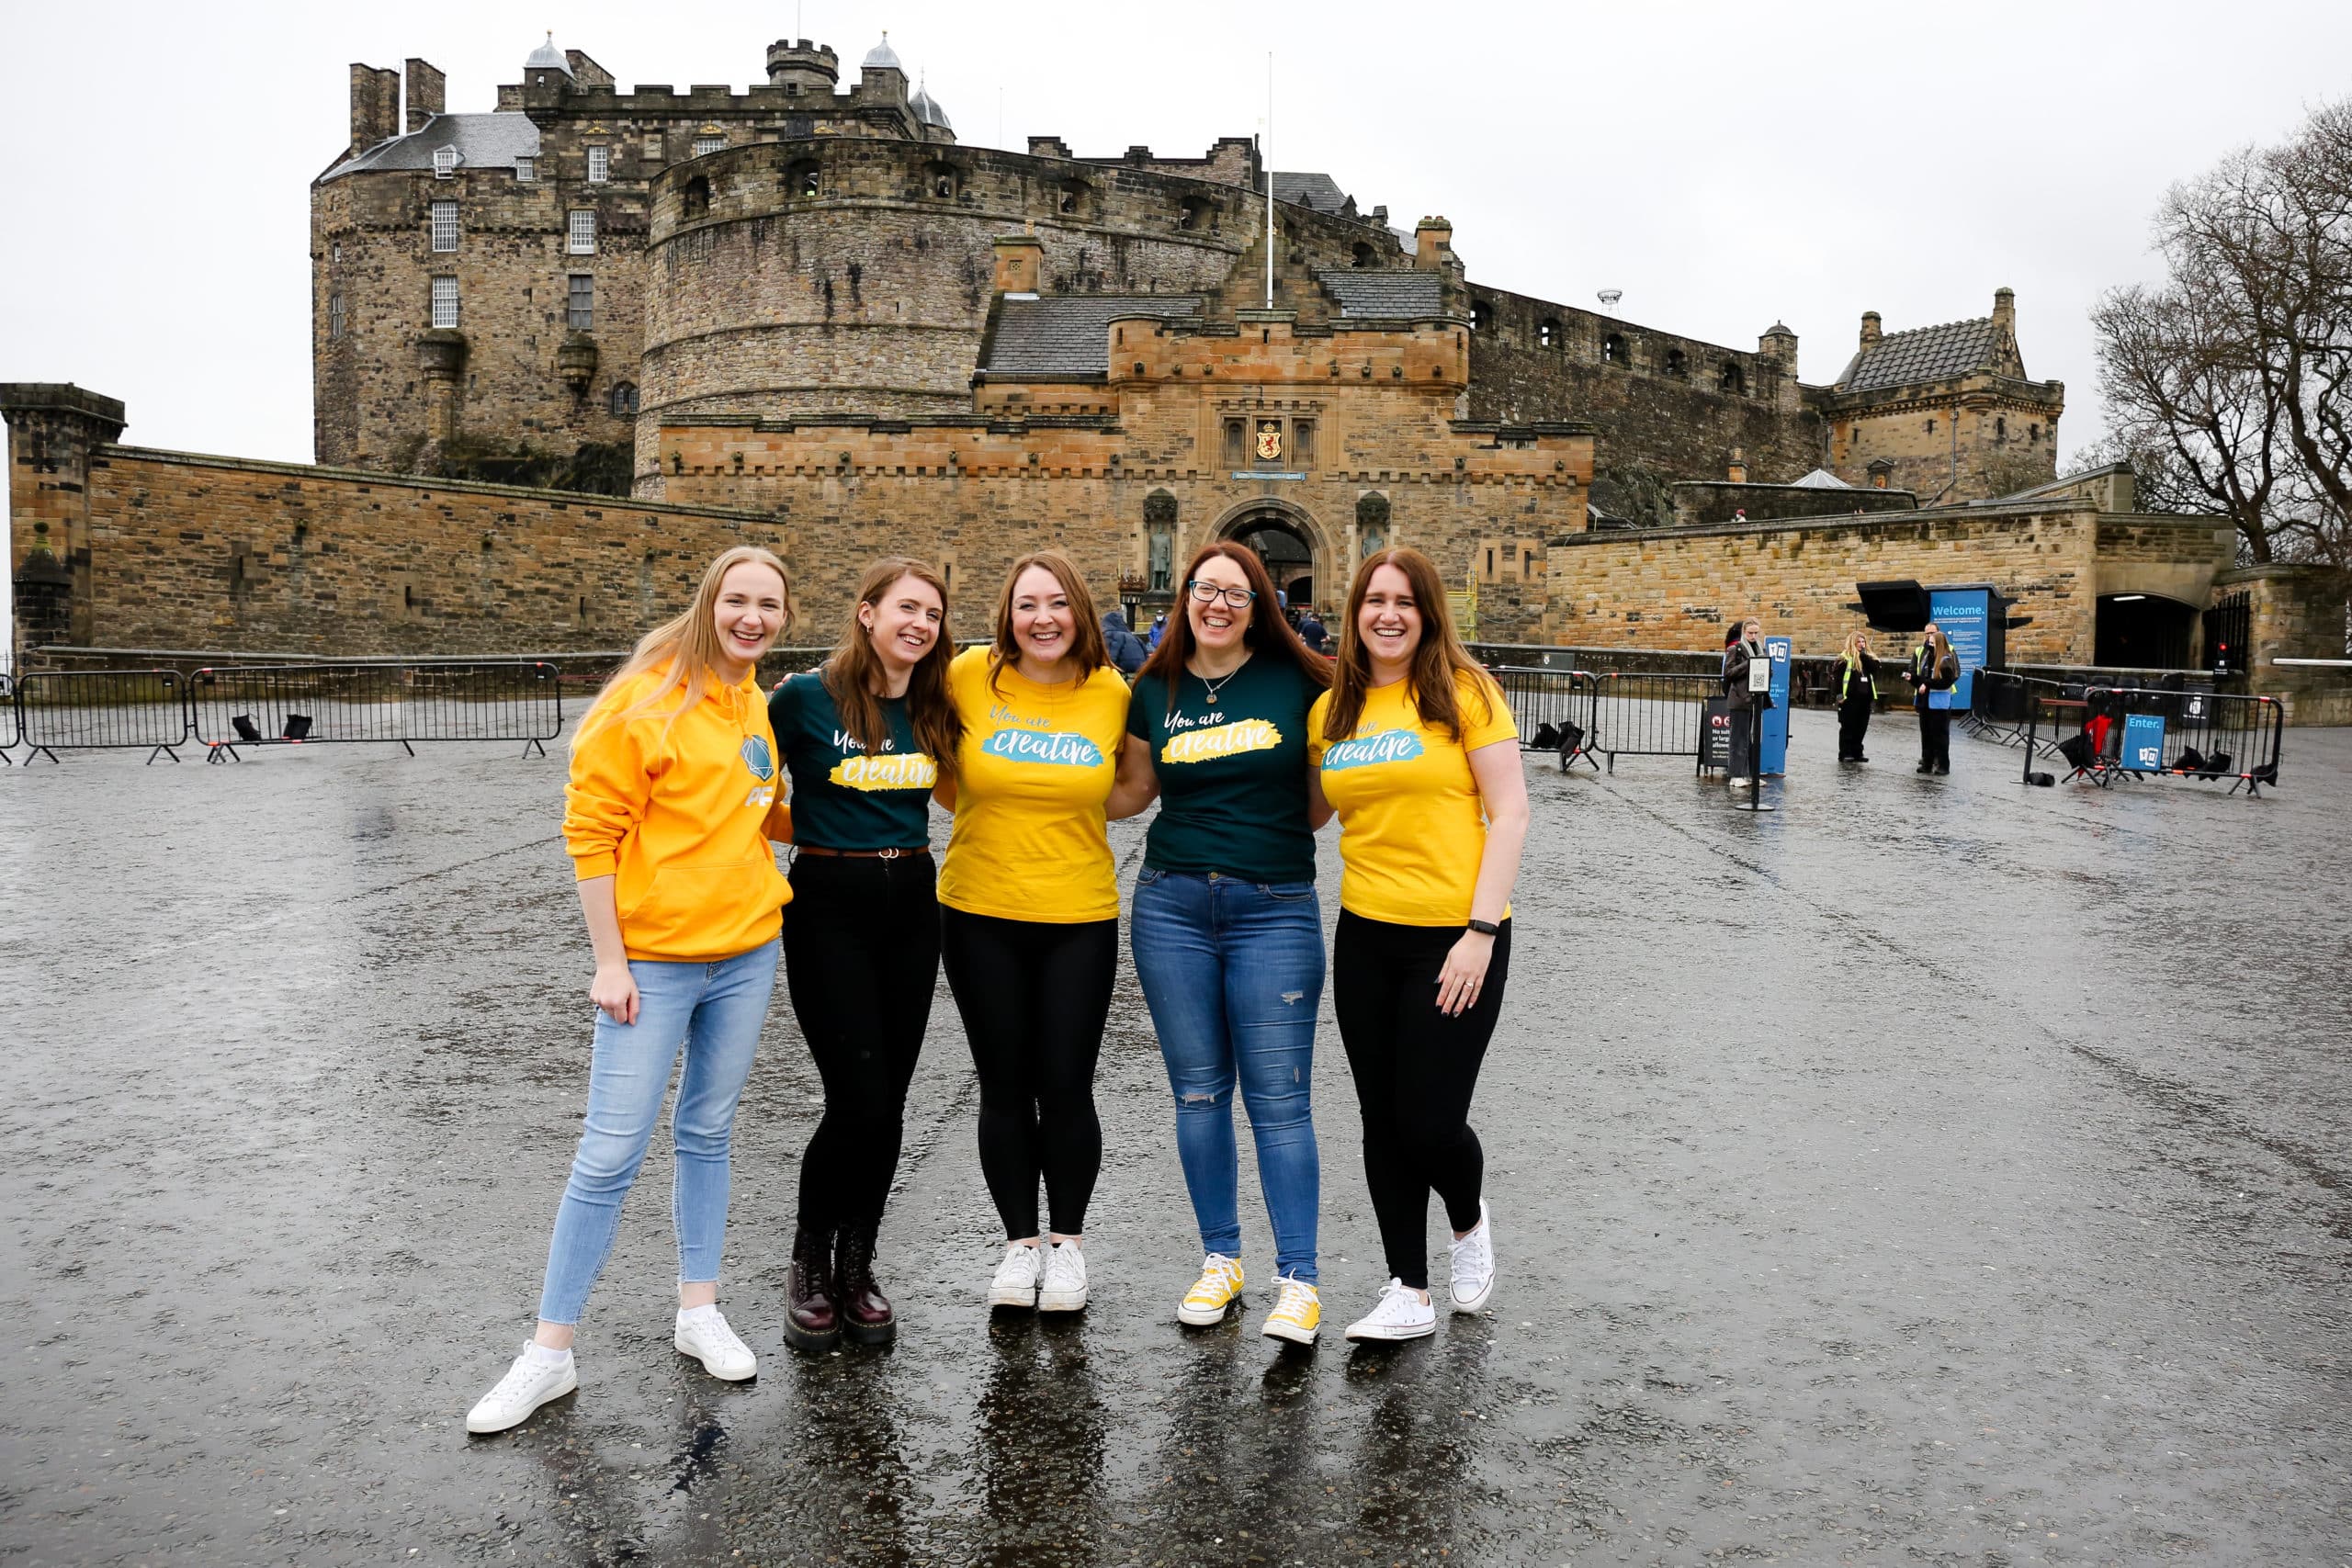 people in yellow and green t-shirts in front of Edinburgh castle